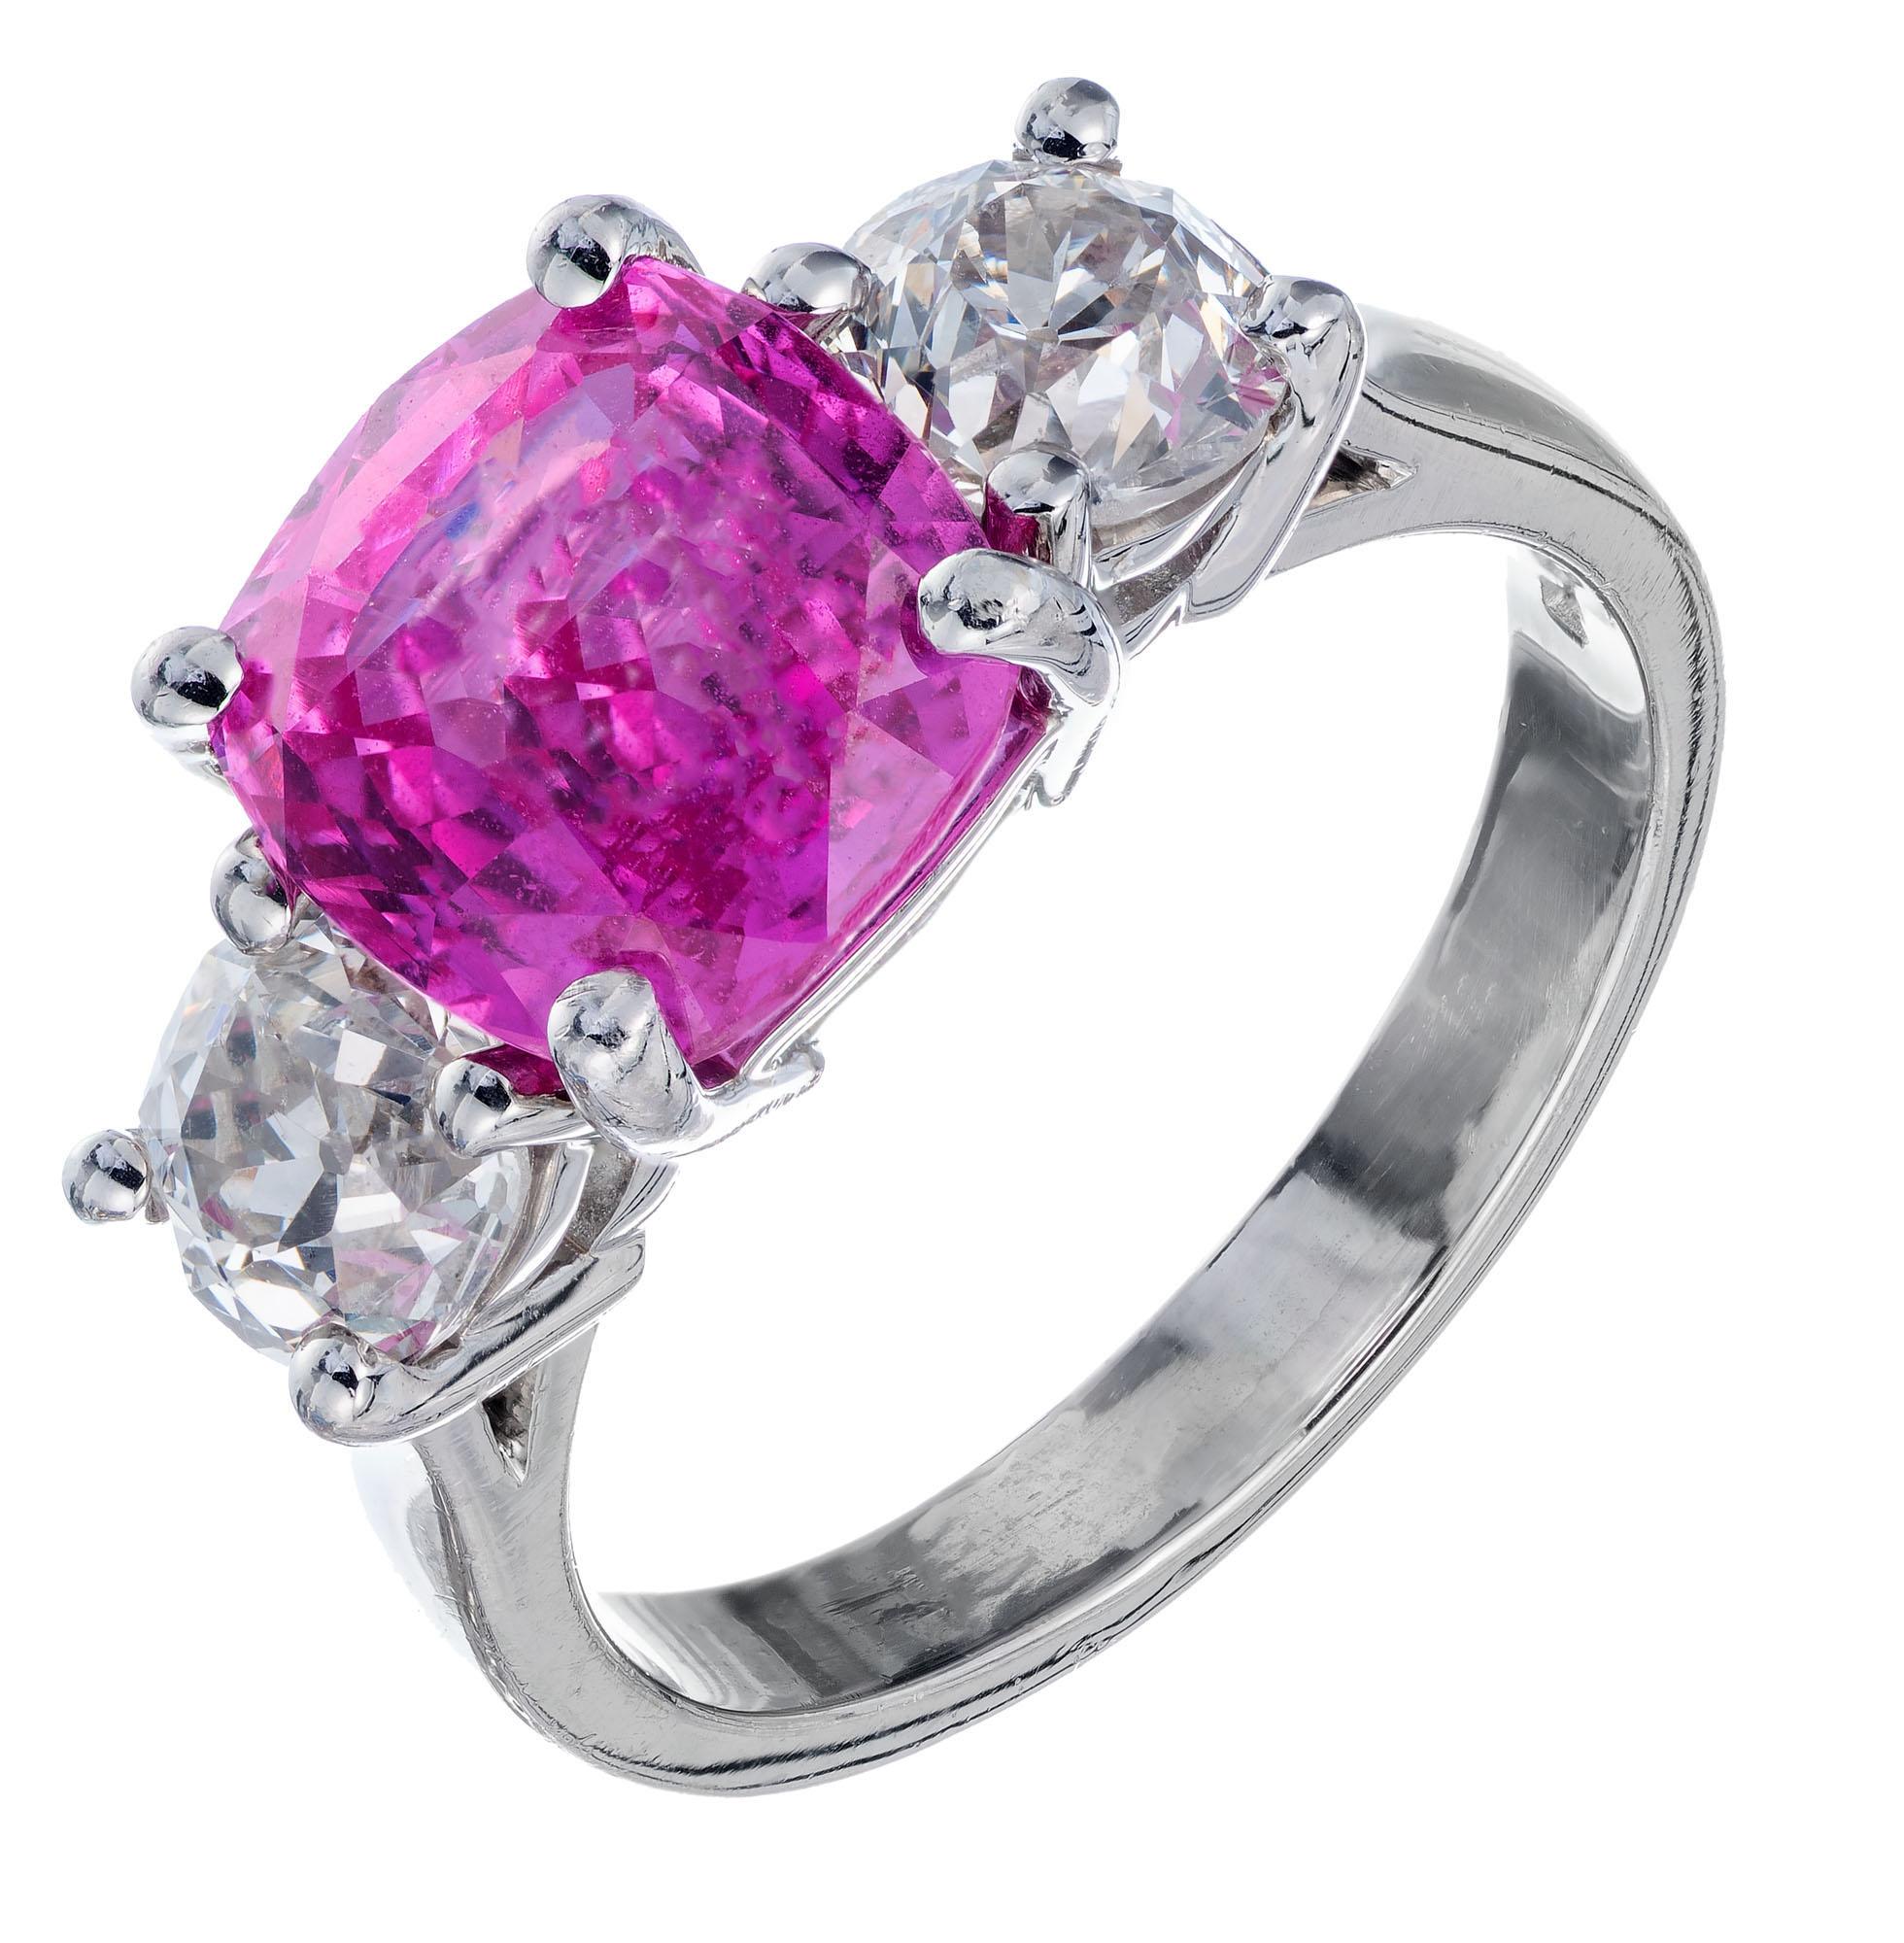 Cushion pink sapphire and diamond engagement ring. GIA certified simple heat only center sapphire with two round accent diamonds in a platinum three-stone setting from the Peter Suchy Workshop.

1 cushion cut natural pink sapphire no heat 4.02cts.